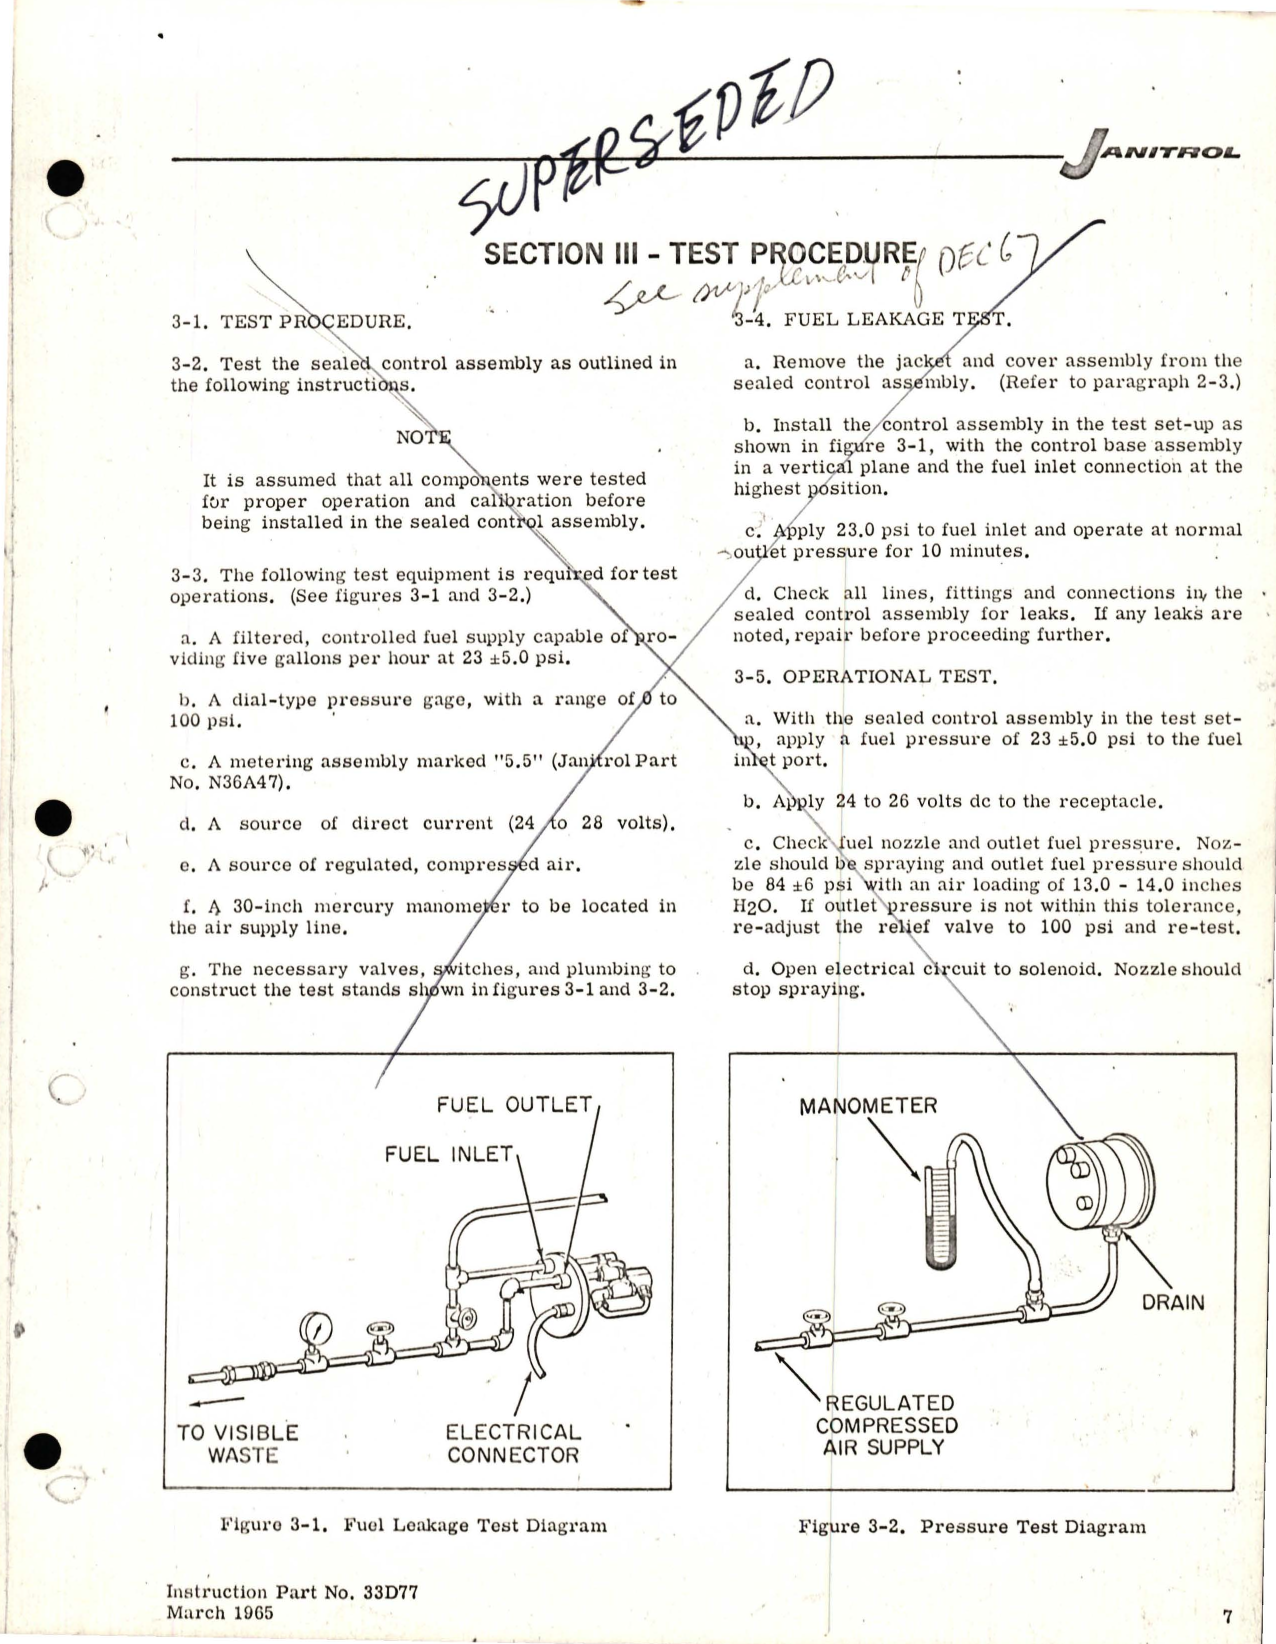 Sample page 7 from AirCorps Library document: Maintenance Instructions for Sealed Control Assembly - Part 32D50